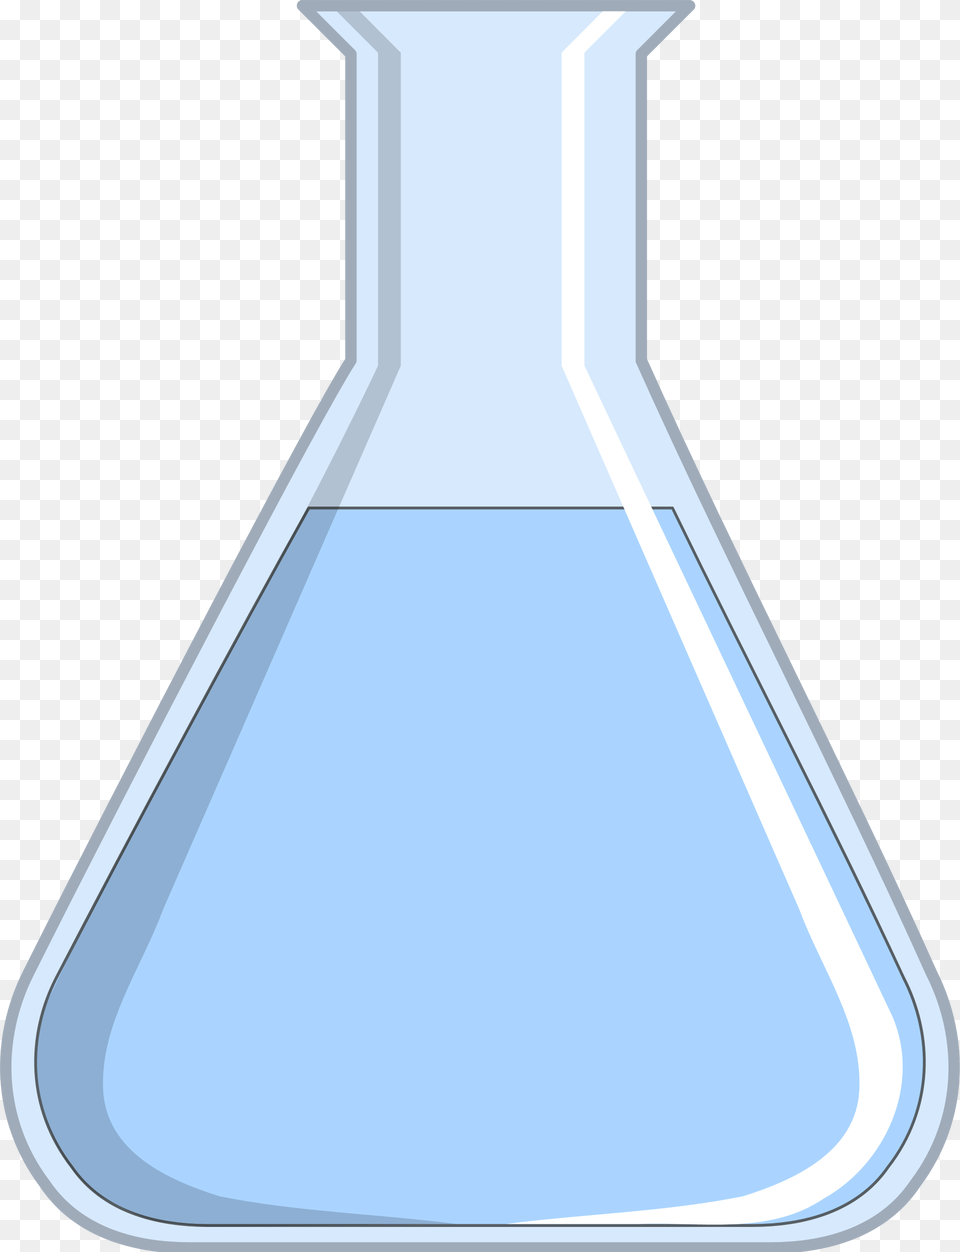 This Icons Design Of Test Tube, Jar, Cone, Bow, Weapon Free Png